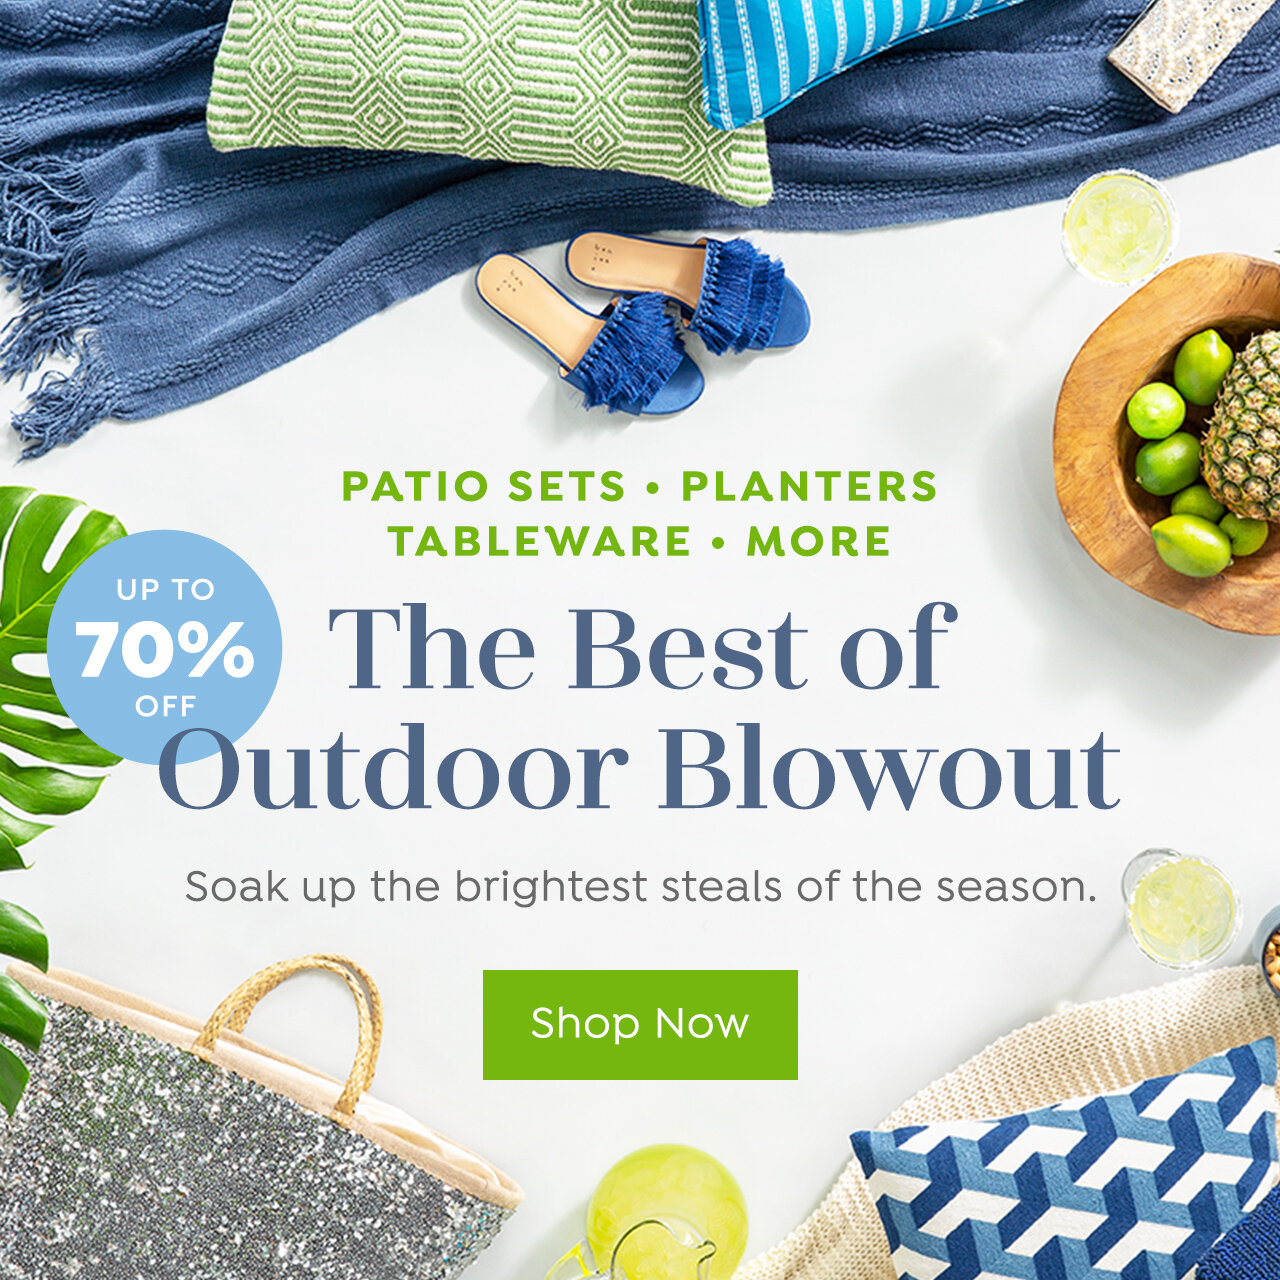 The Best of Outdoor Blowout